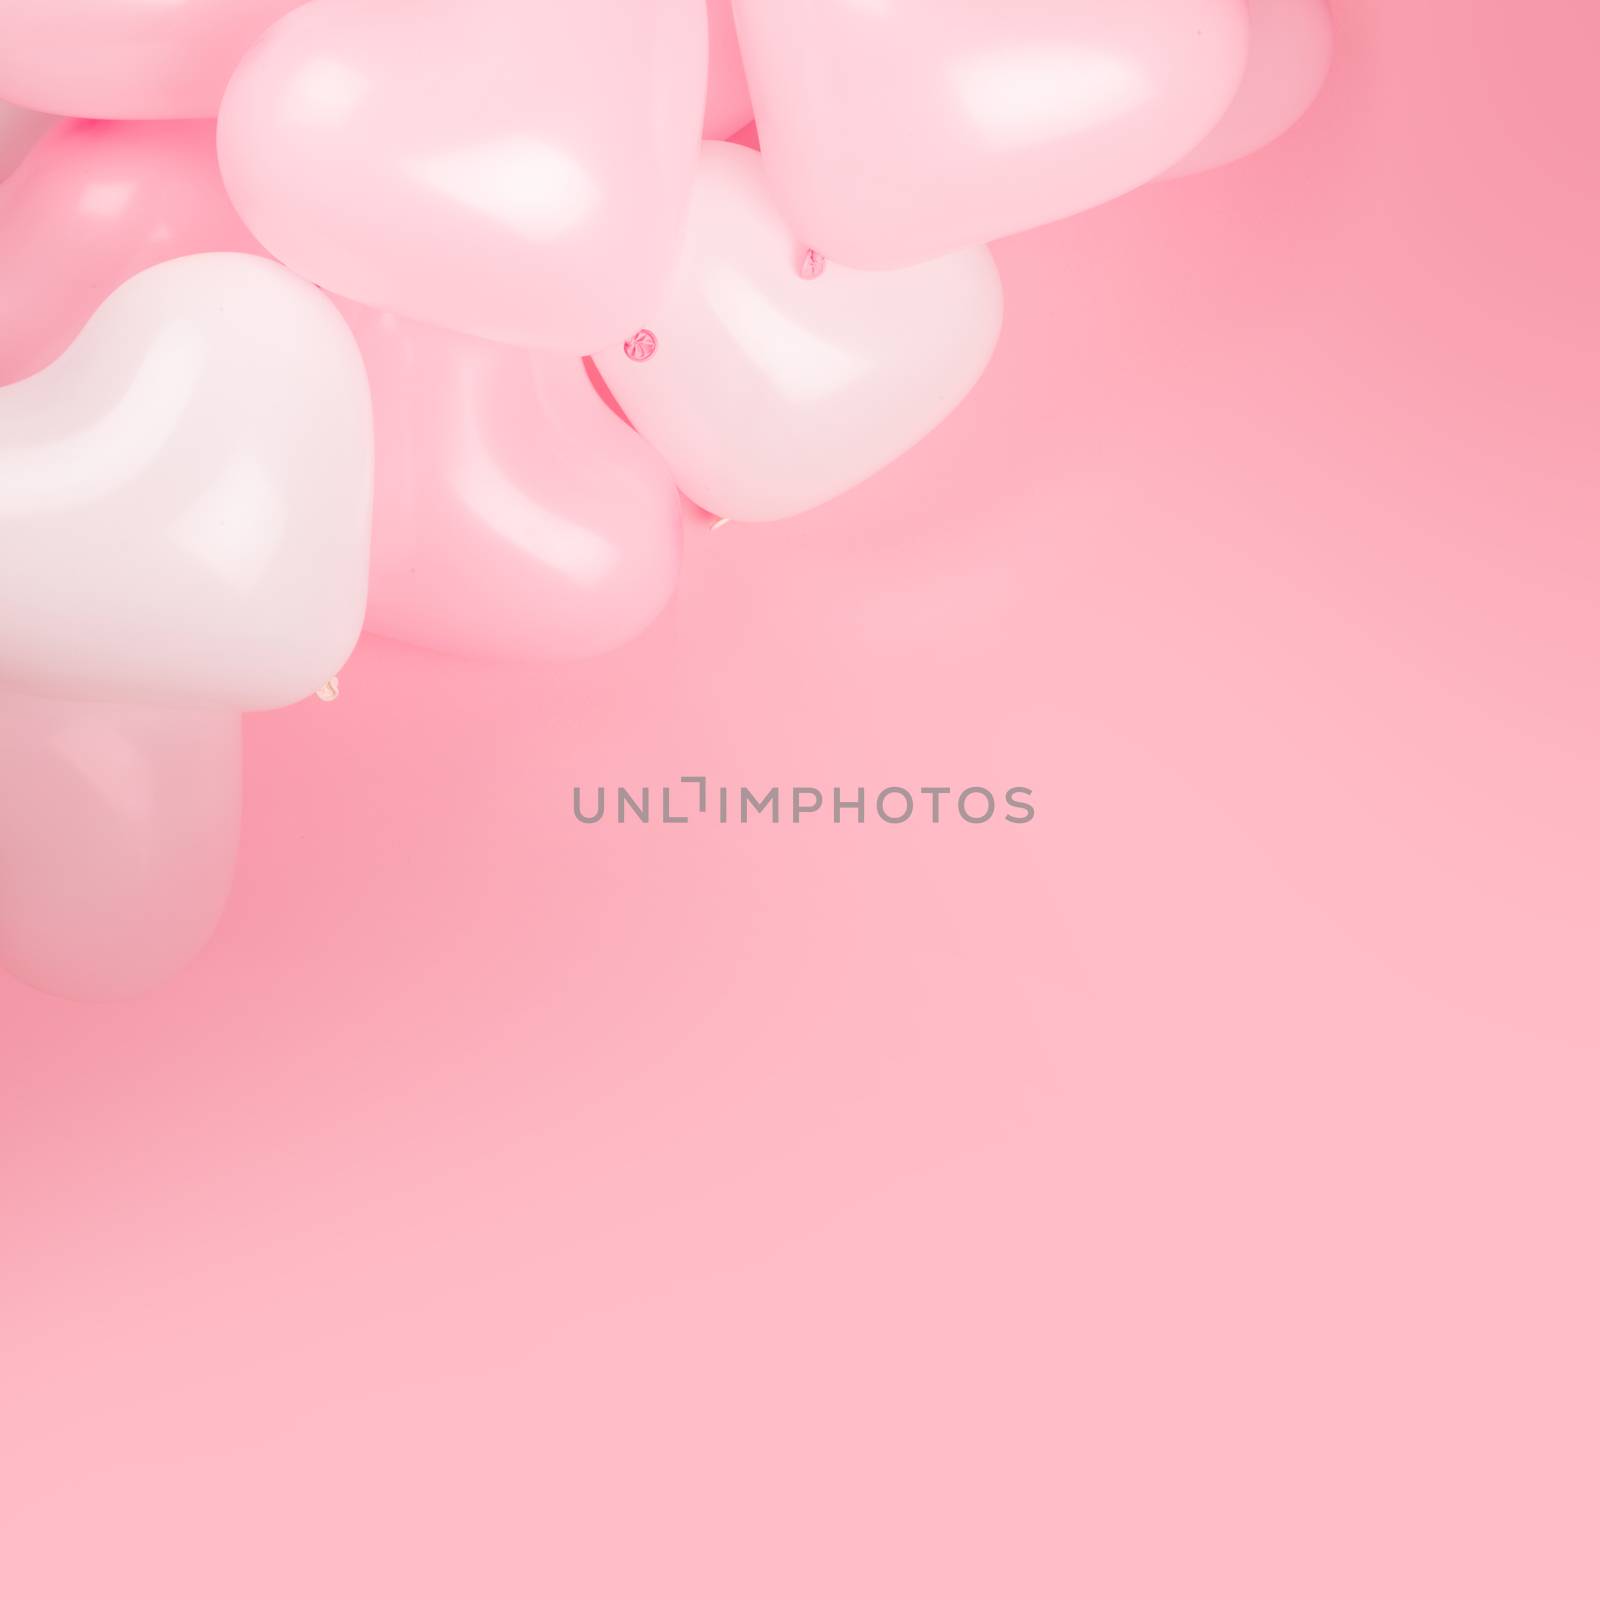 Happy valentines day greetings many heart shaped pink and white balloons background border frame flat lay corner with copy space for text